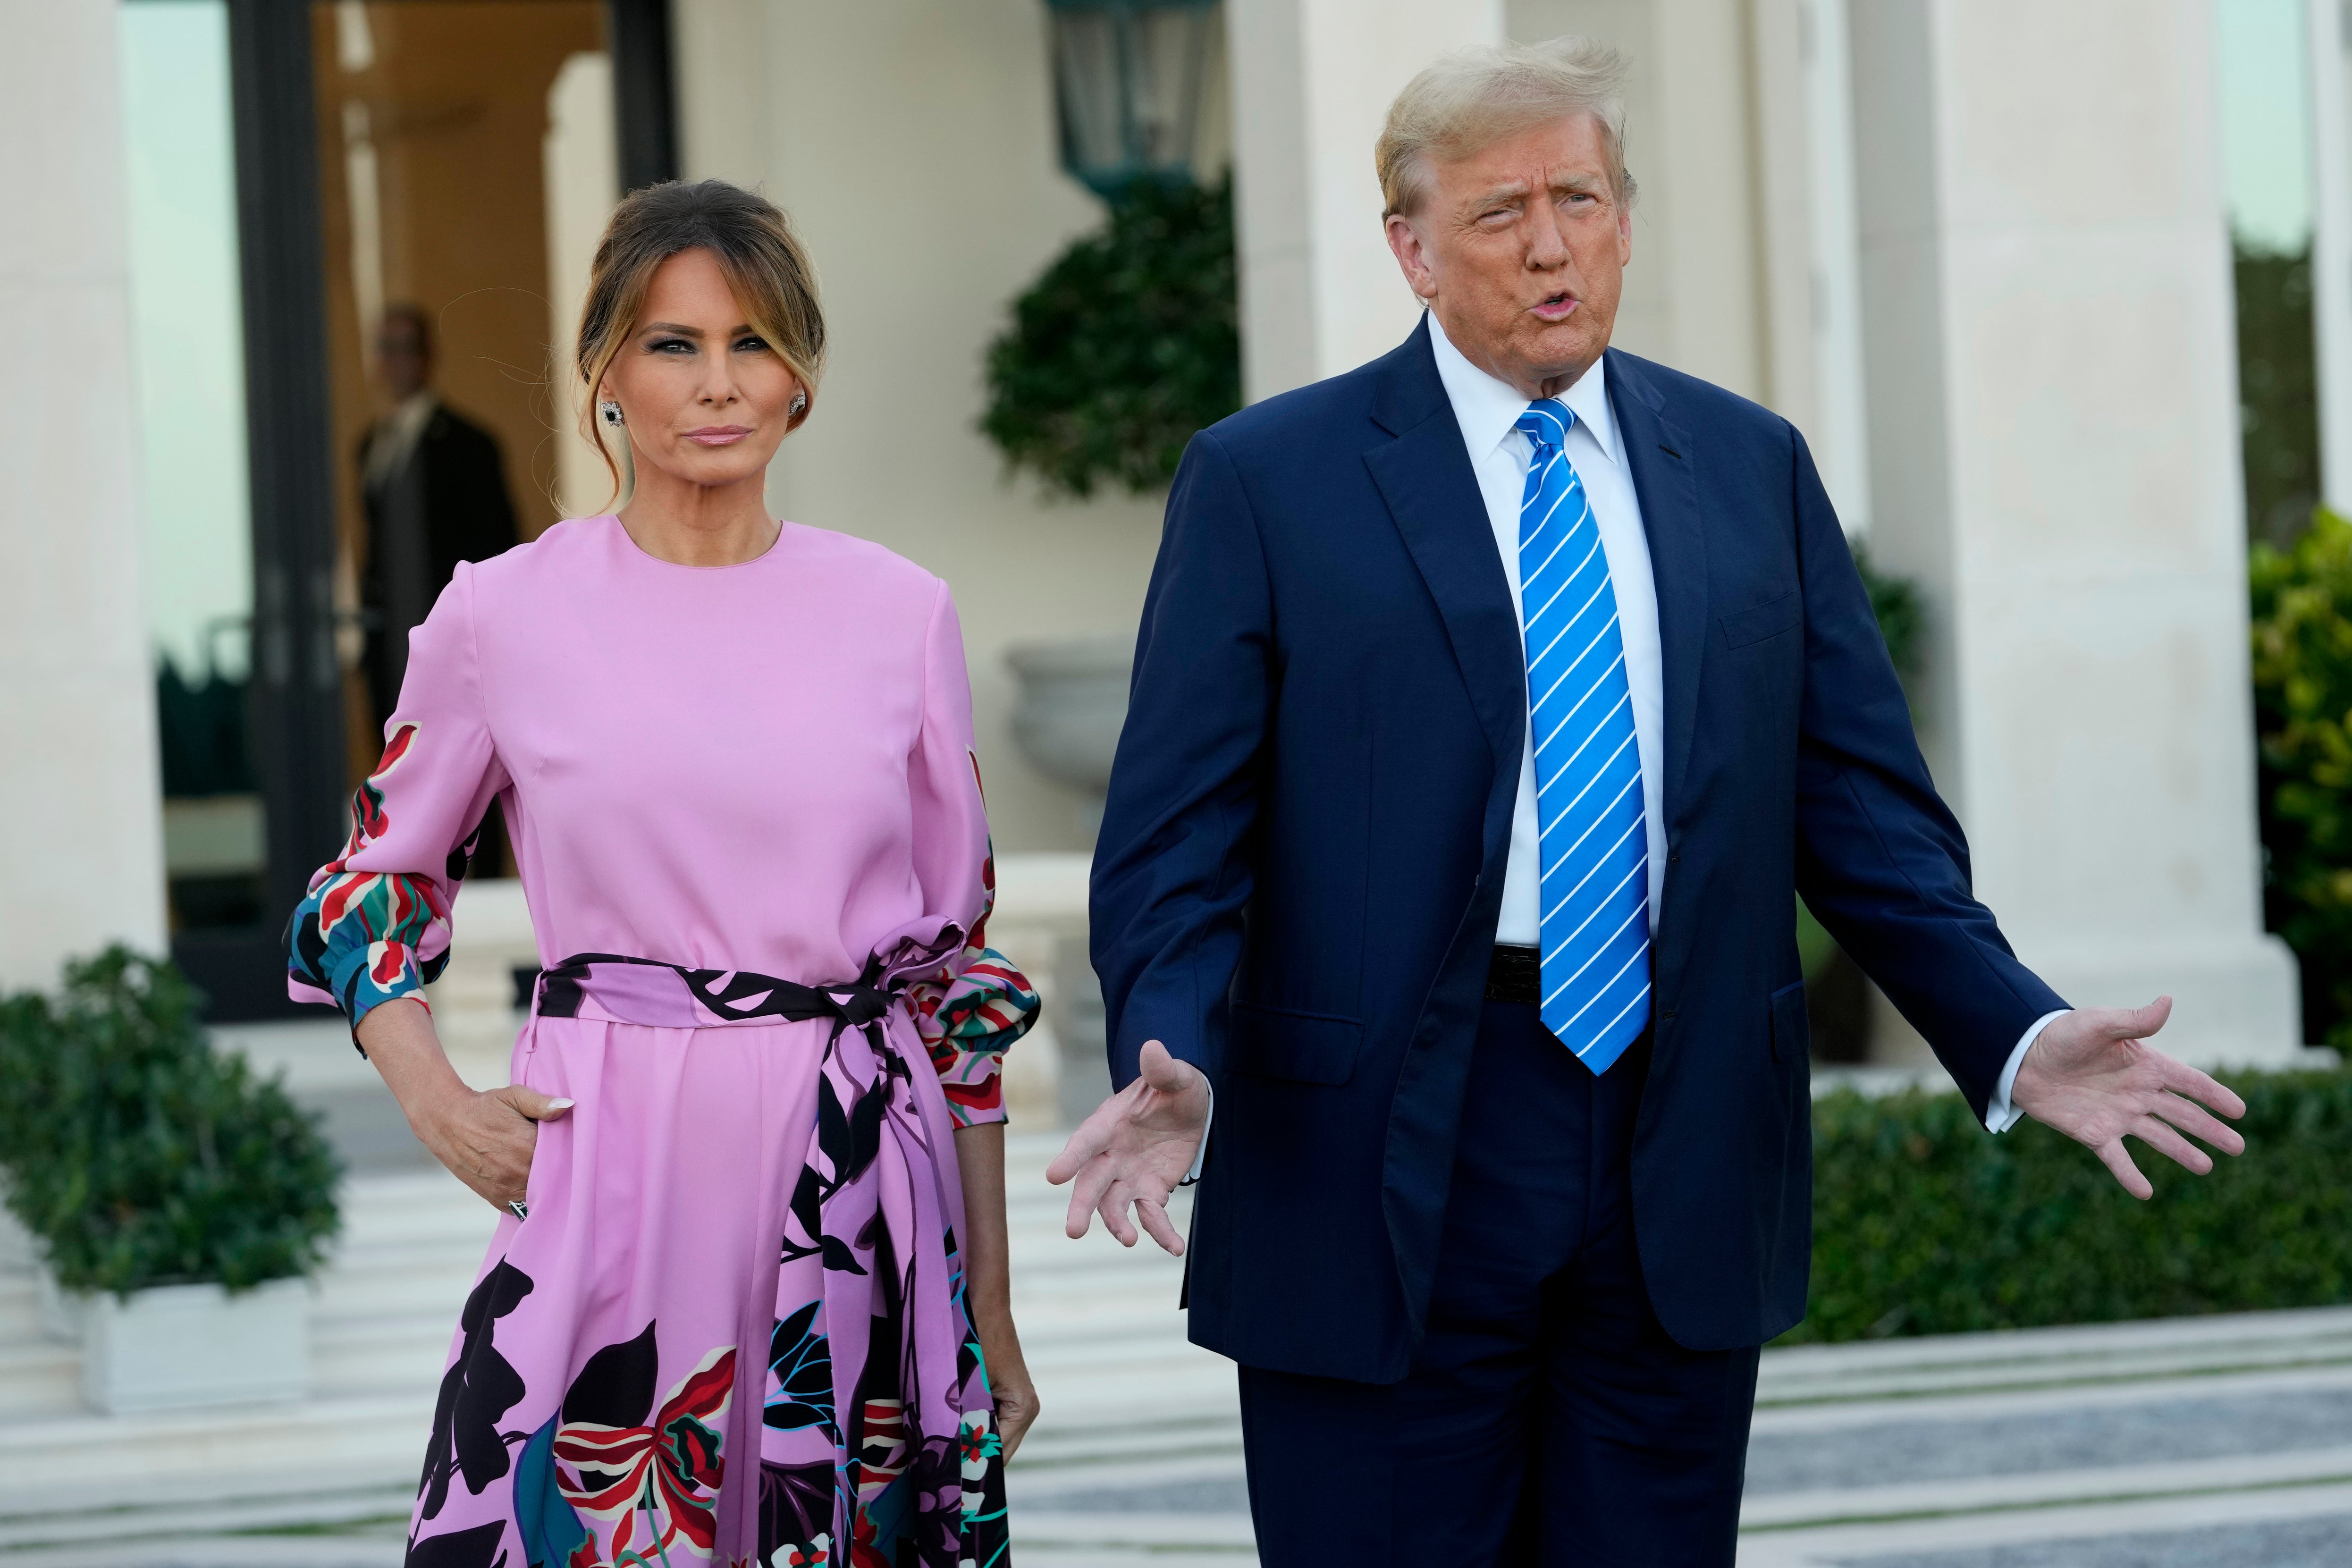 Melania Trump did not appear in court at all throughout her husband’s trial, and has not commented on it publicly